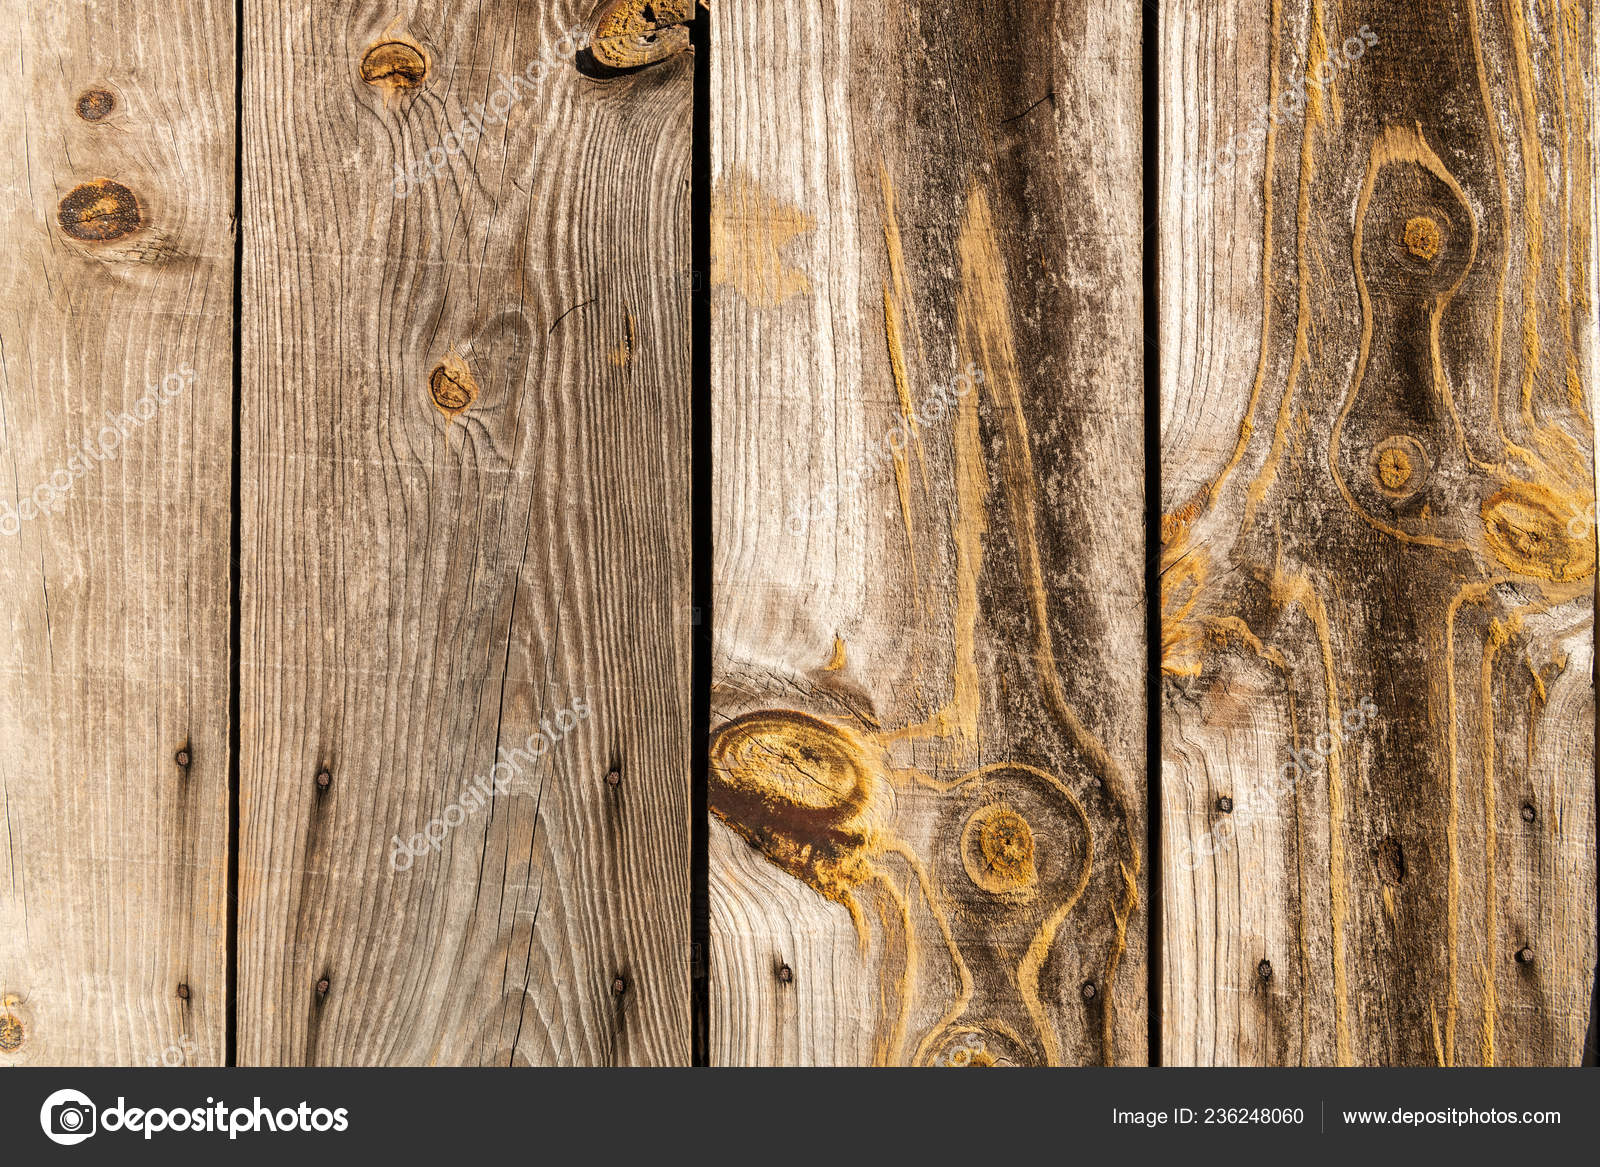 Barn Wooden Wall Planking Texture Reclaimed Old Wood Slats